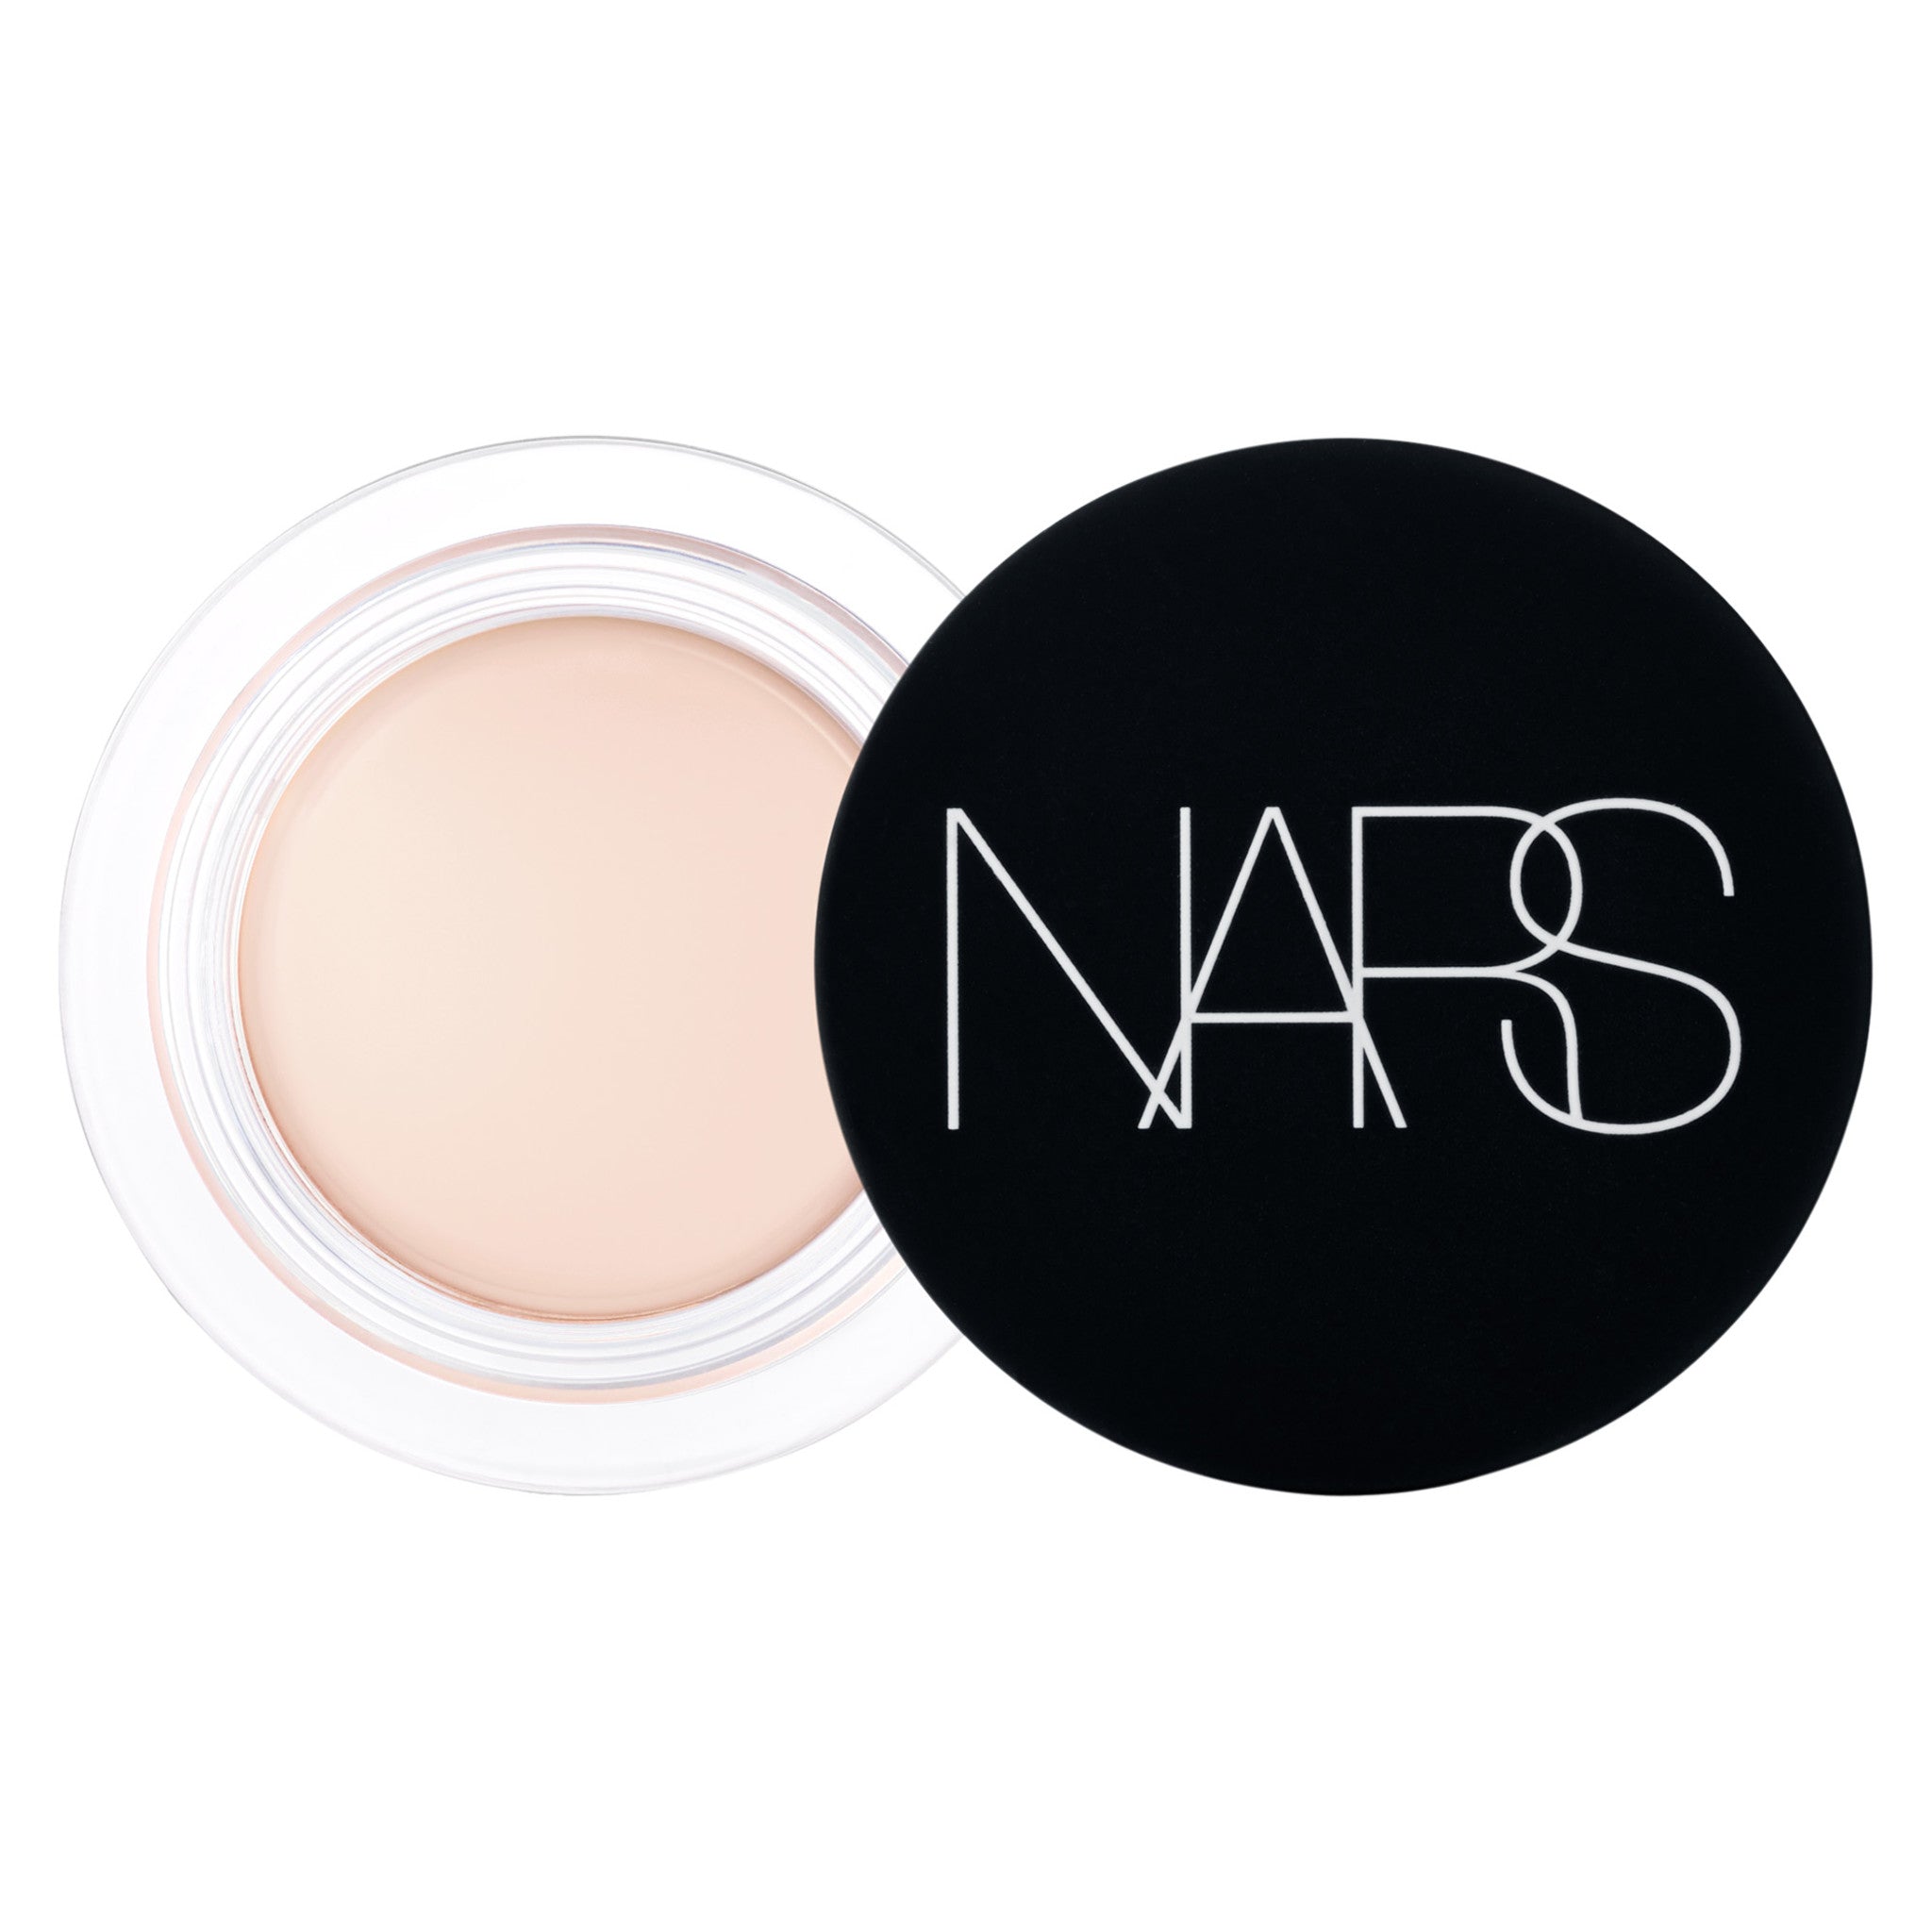 Nars Soft Matte Complete Concealer Color/Shade variant: Affogato main image. This product is for light cool complexions